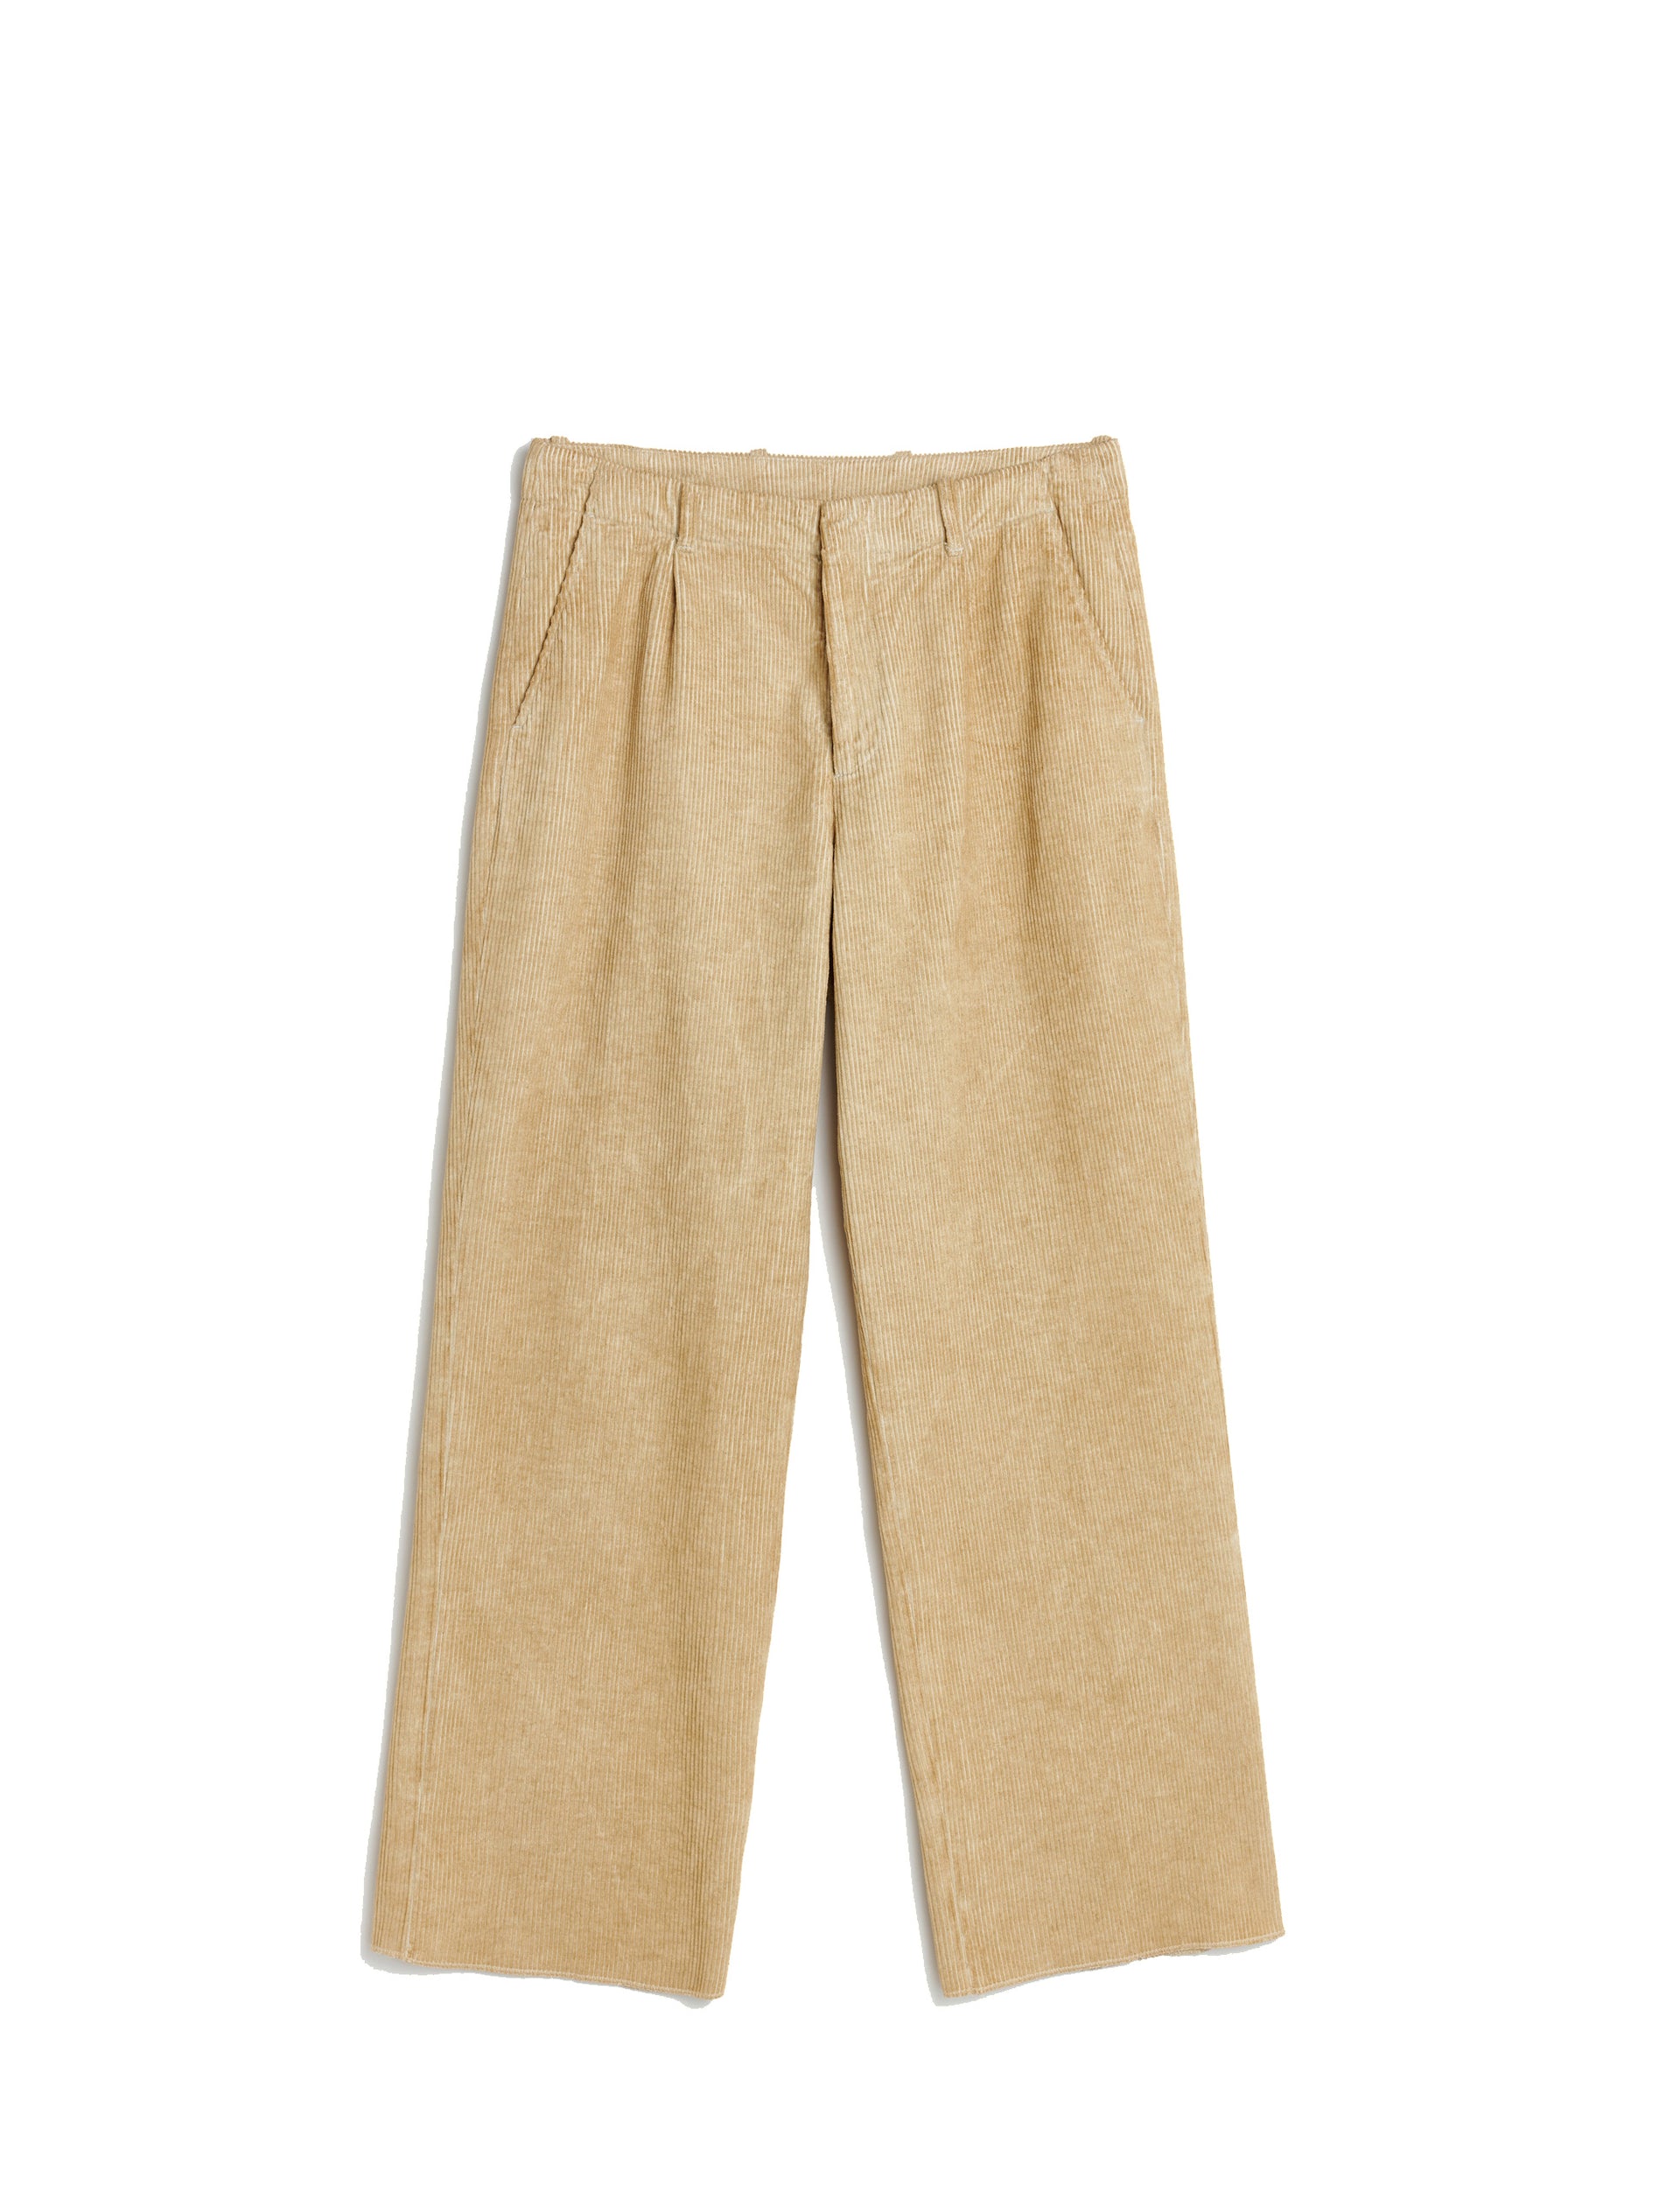 OUR LEGACY BORROWED CHINO Washed Oat Cotton Linen Cord